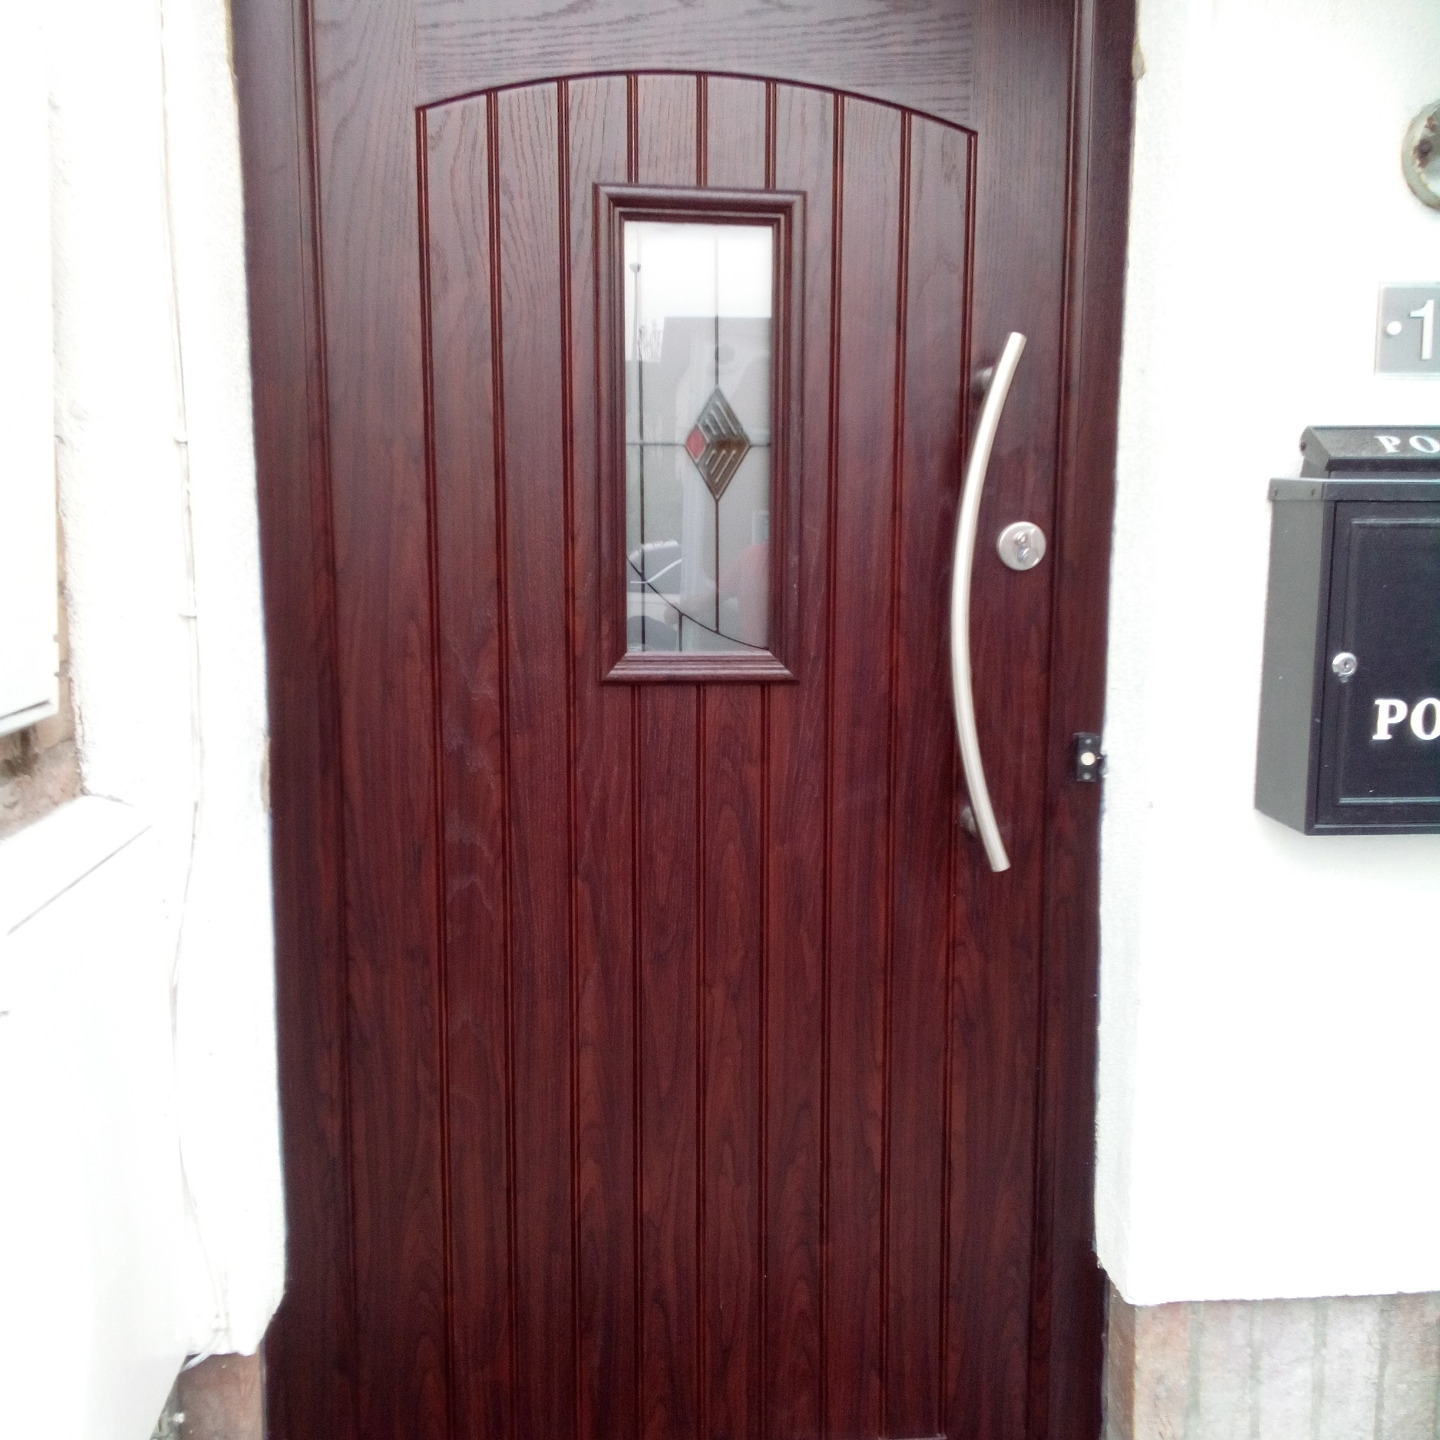 Composite Door in Rosewood. With Slam Lock and Curved stainless steel Handle.  Balbriggan Co Dublin